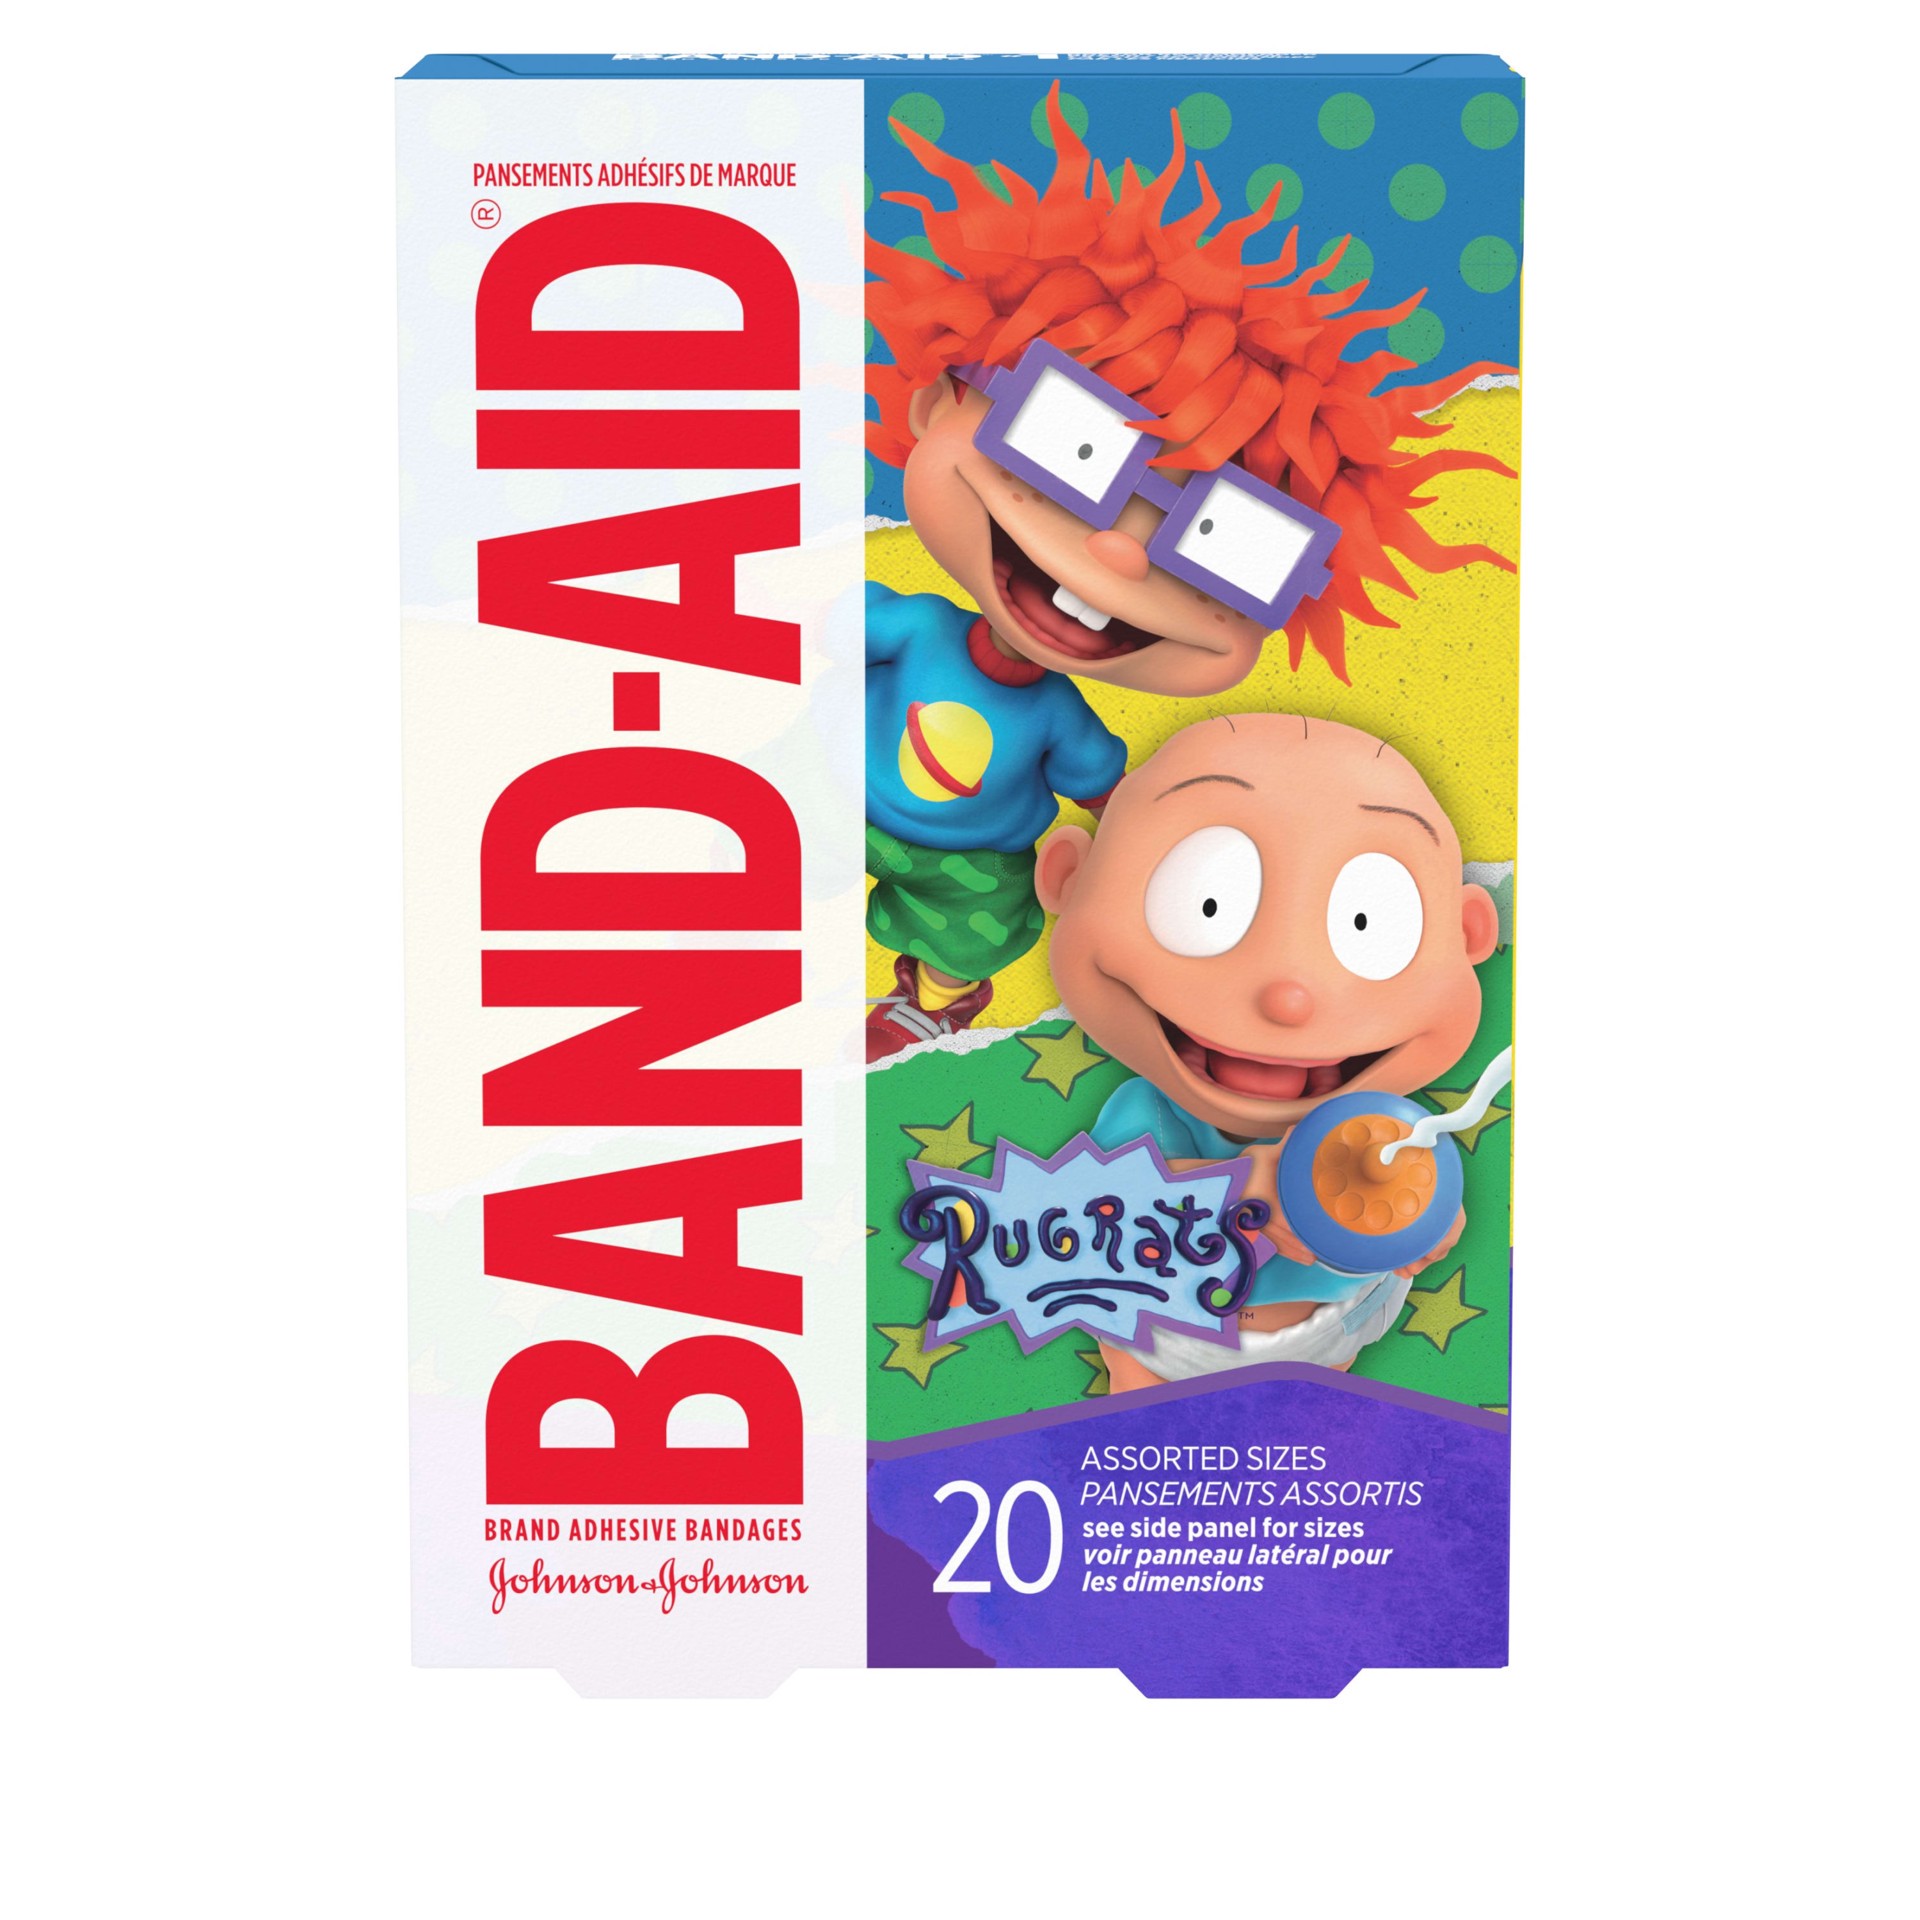 slide 1 of 8, BAND-AID Adhesive Bandages for Minor Cuts & Scrapes, Wound Care Featuring Nickelodeon Rugrats Characters, Fun Bandages for Kids and Toddlers, Assorted Sizes 20 Count, 20 ct